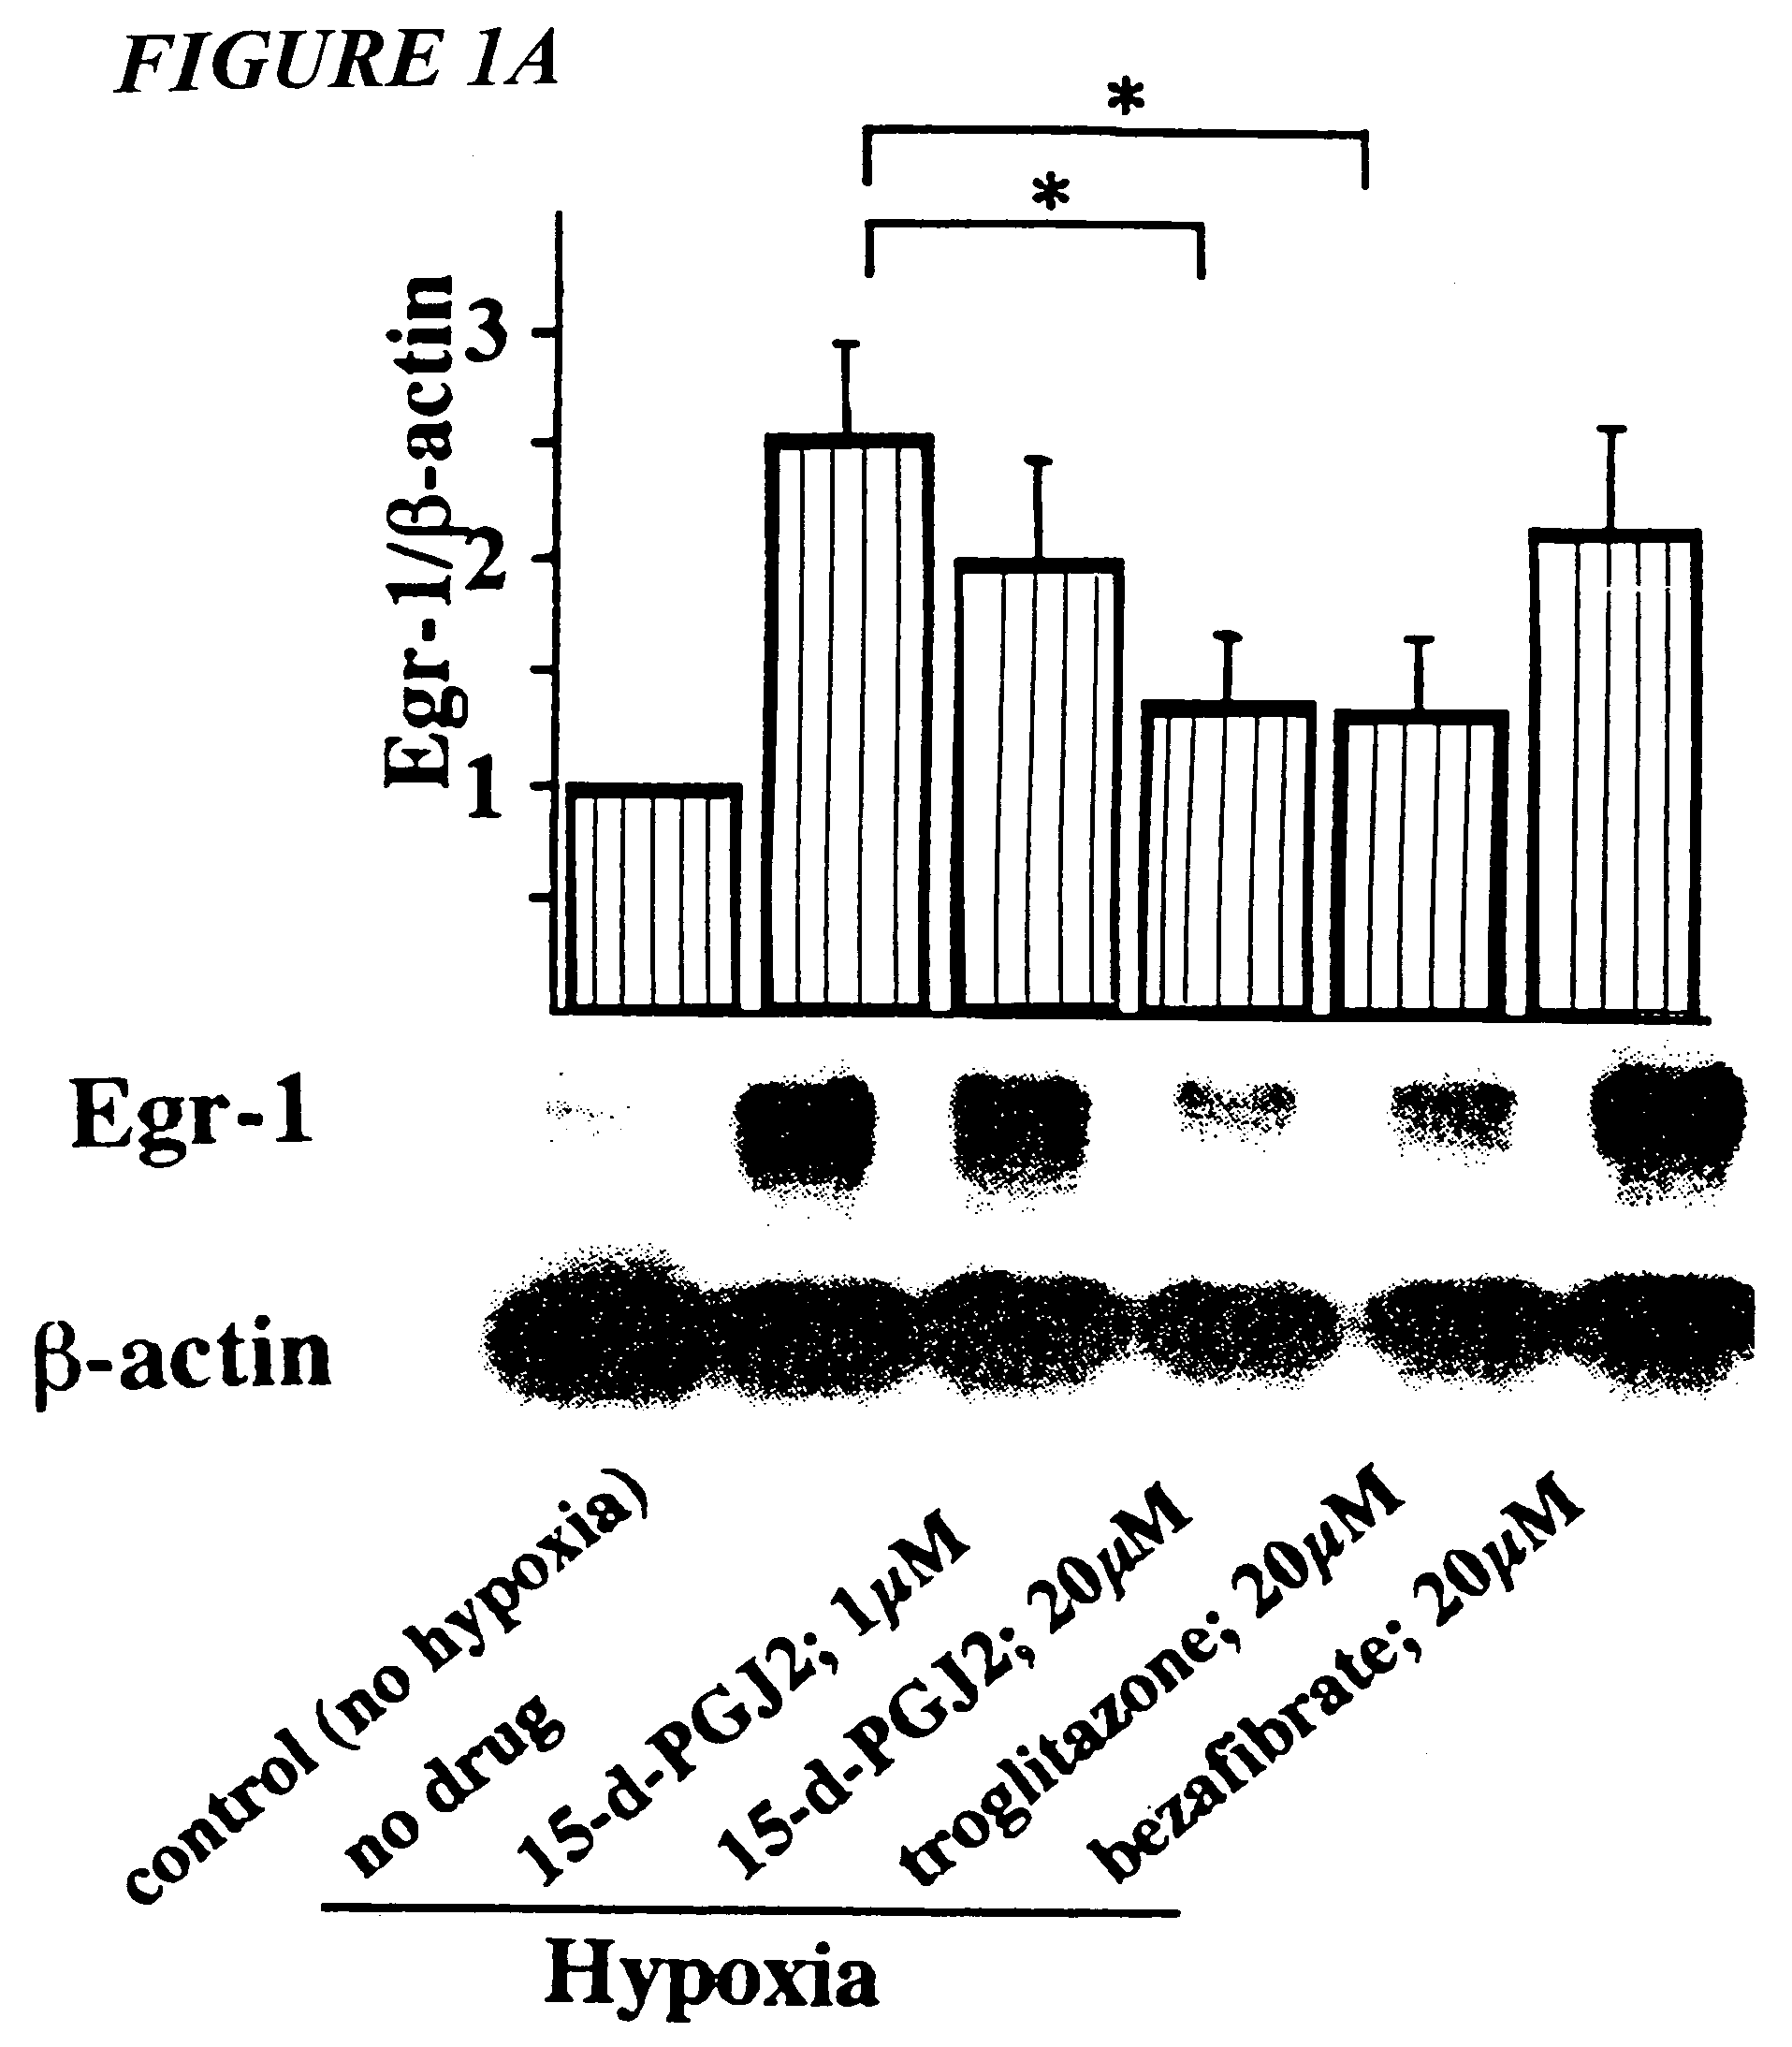 Inhibition of Egr-1 expression by ppar-gamma agonists and related compositions and methods